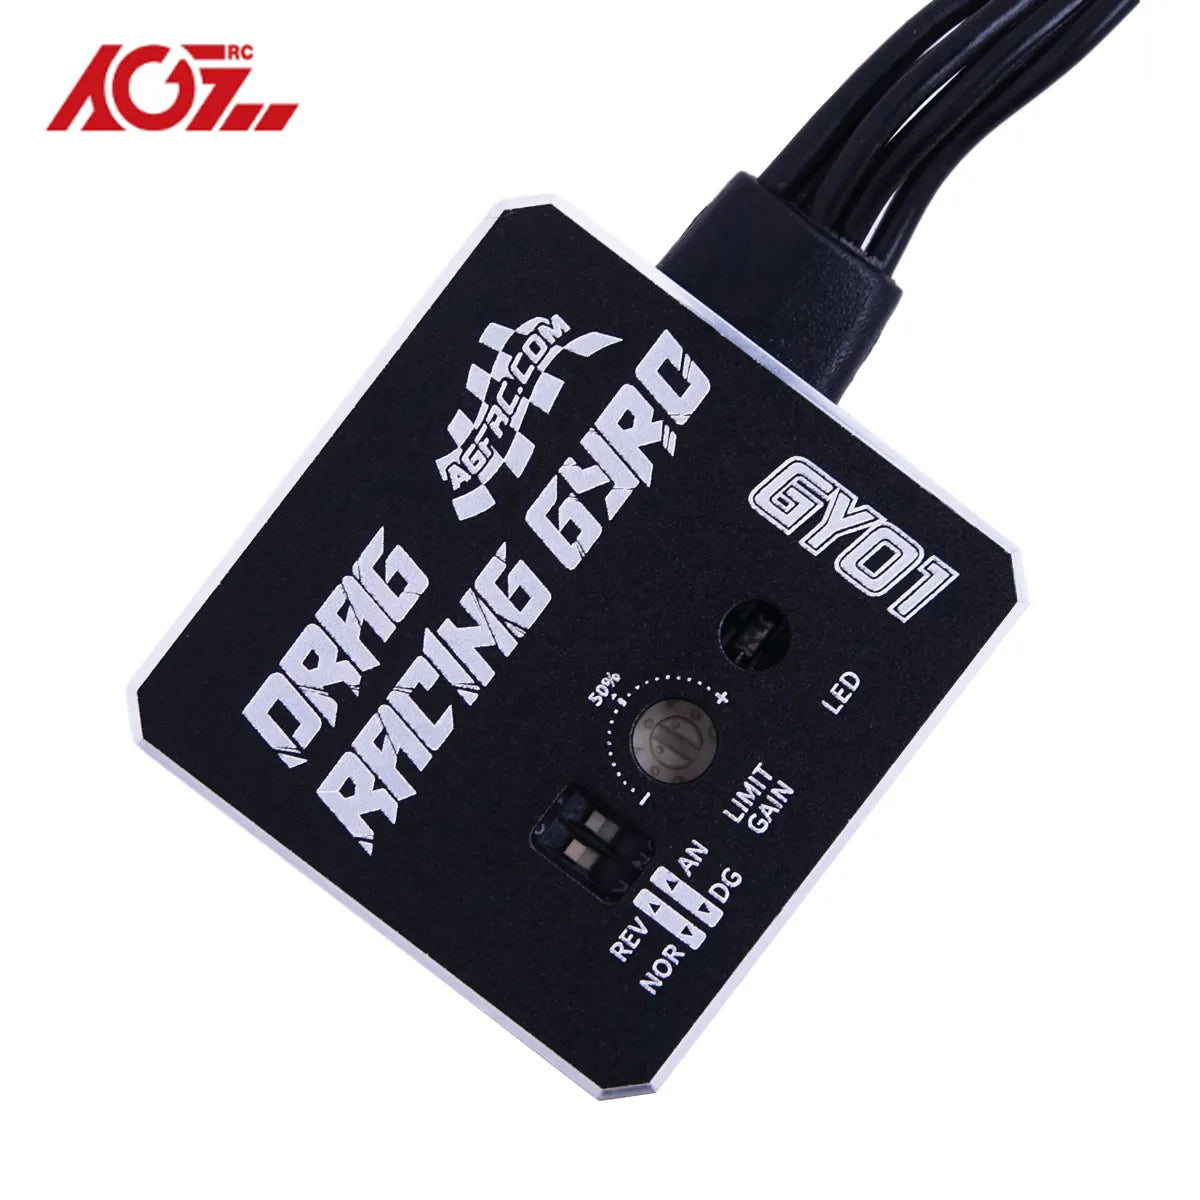 AGFRC GY01 CNC Aluminum Case High Stability Control Easy Gain Tuned Adjustable Steering Rated Gyro Part for RC Drift Car F1 Car